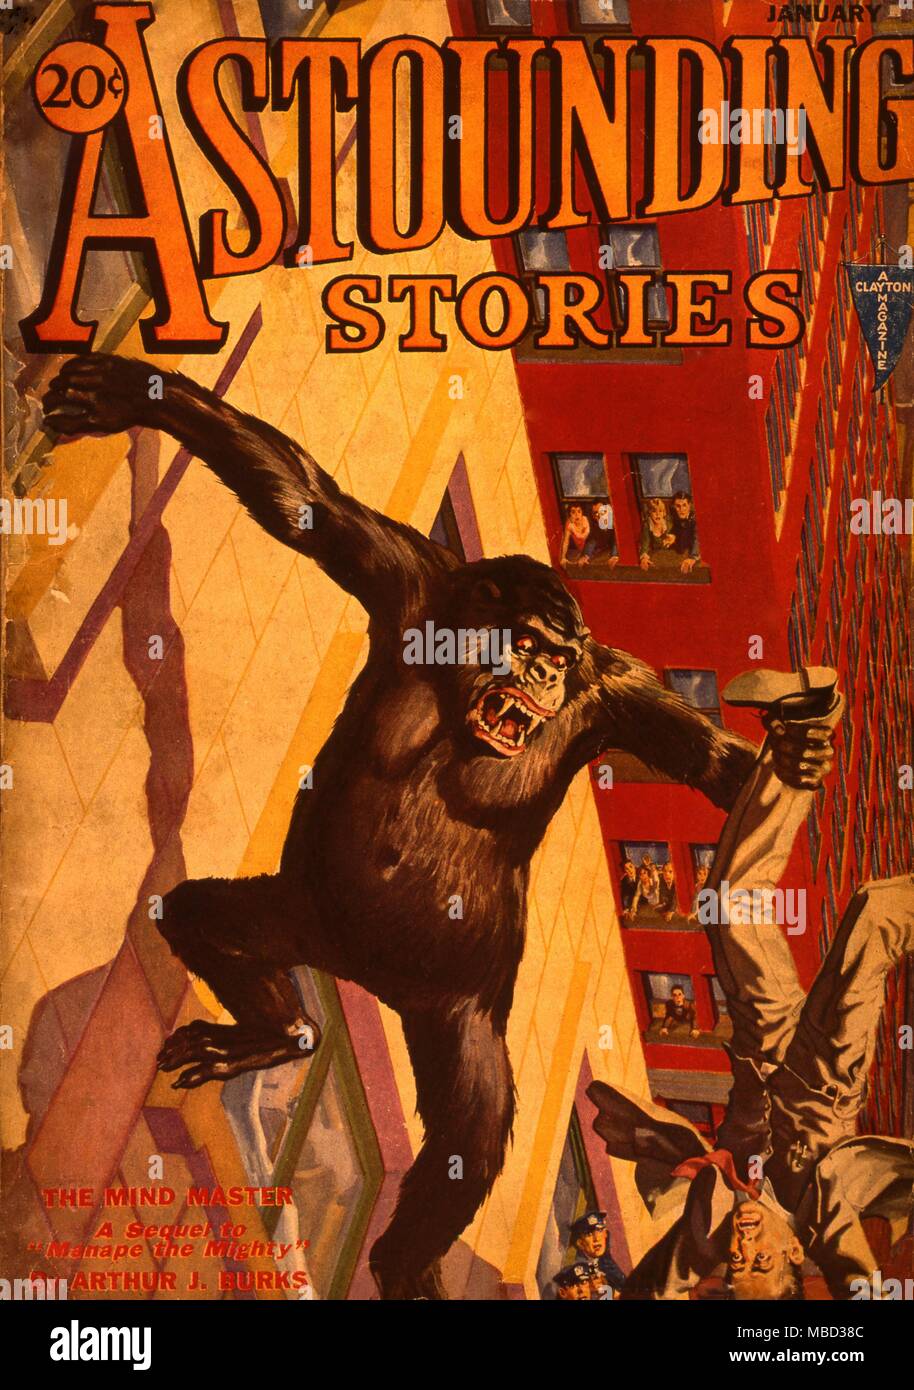 Science Fiction and Horror Magazines. Cover of 'Astounding Stories', January 1932. Artwork by H.W.Wesso. Stock Photo